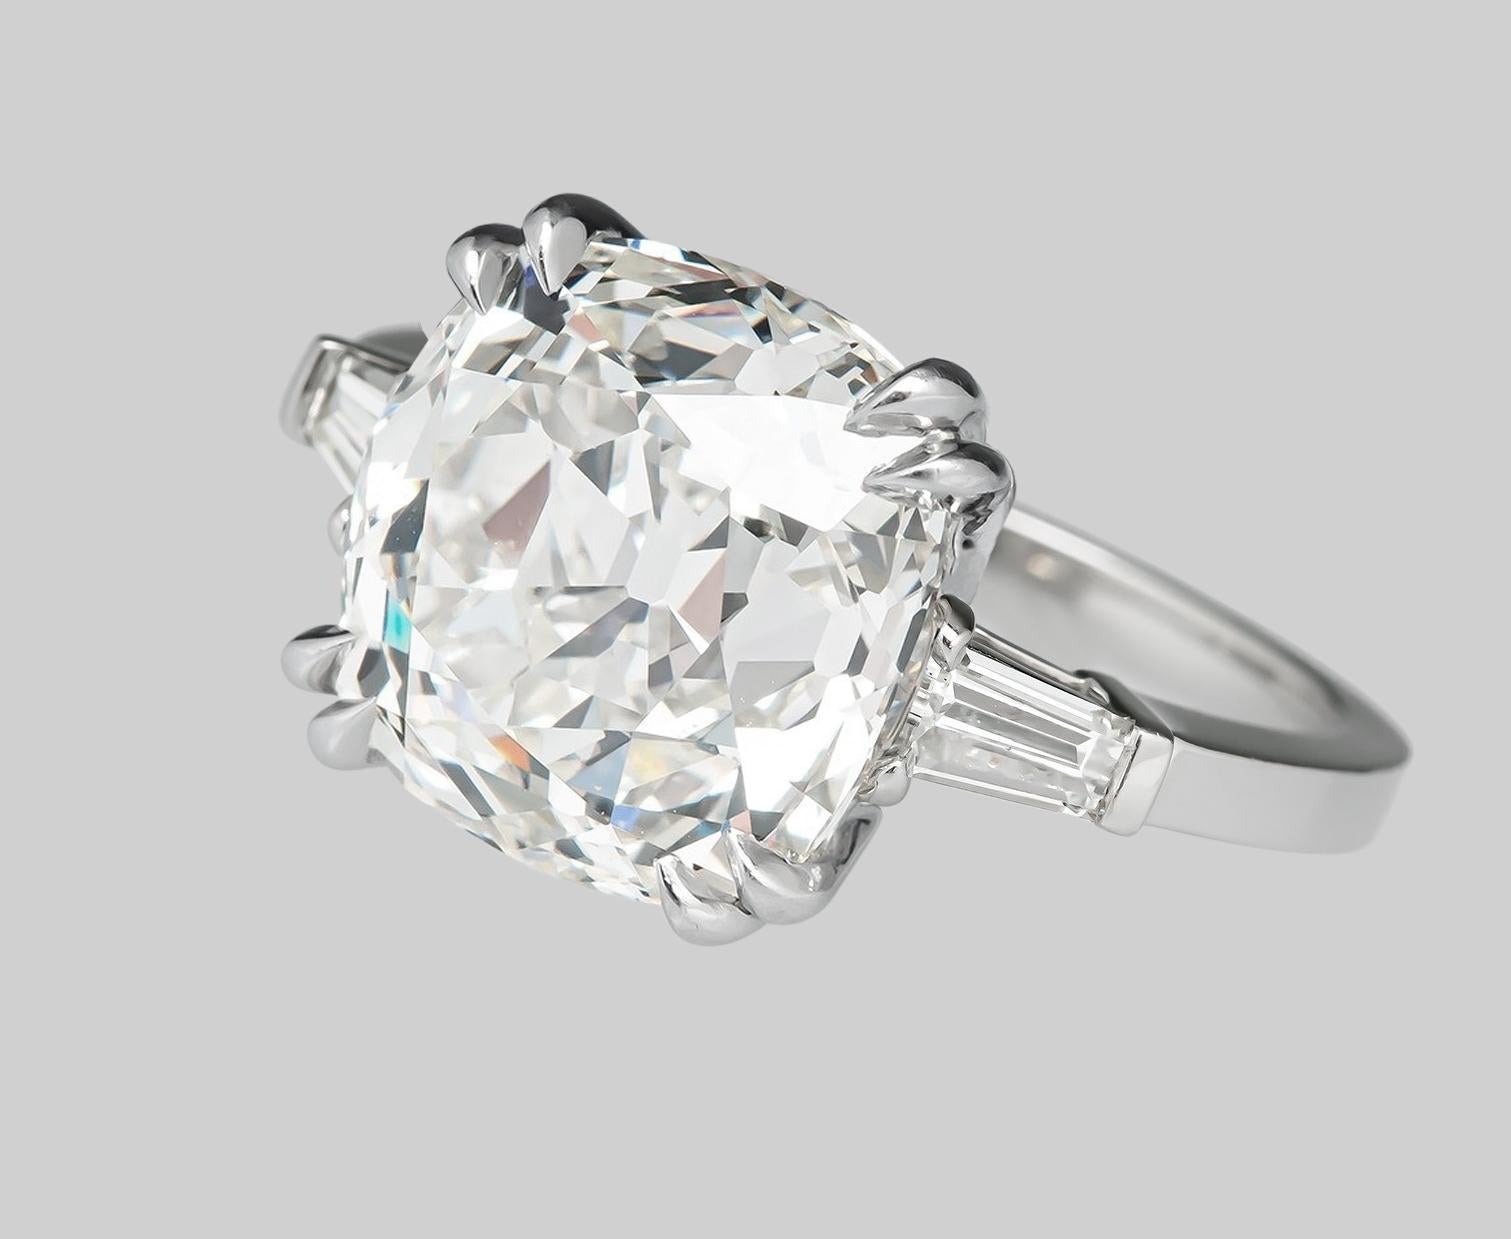 This is a masterpiece of unparalleled elegance consider is a 3 carat flawless D color old mine diamond ring. This extraordinary jewel is a testament to the exceptional craftsmanship and rarity that define the pinnacle of luxury.

The setting has